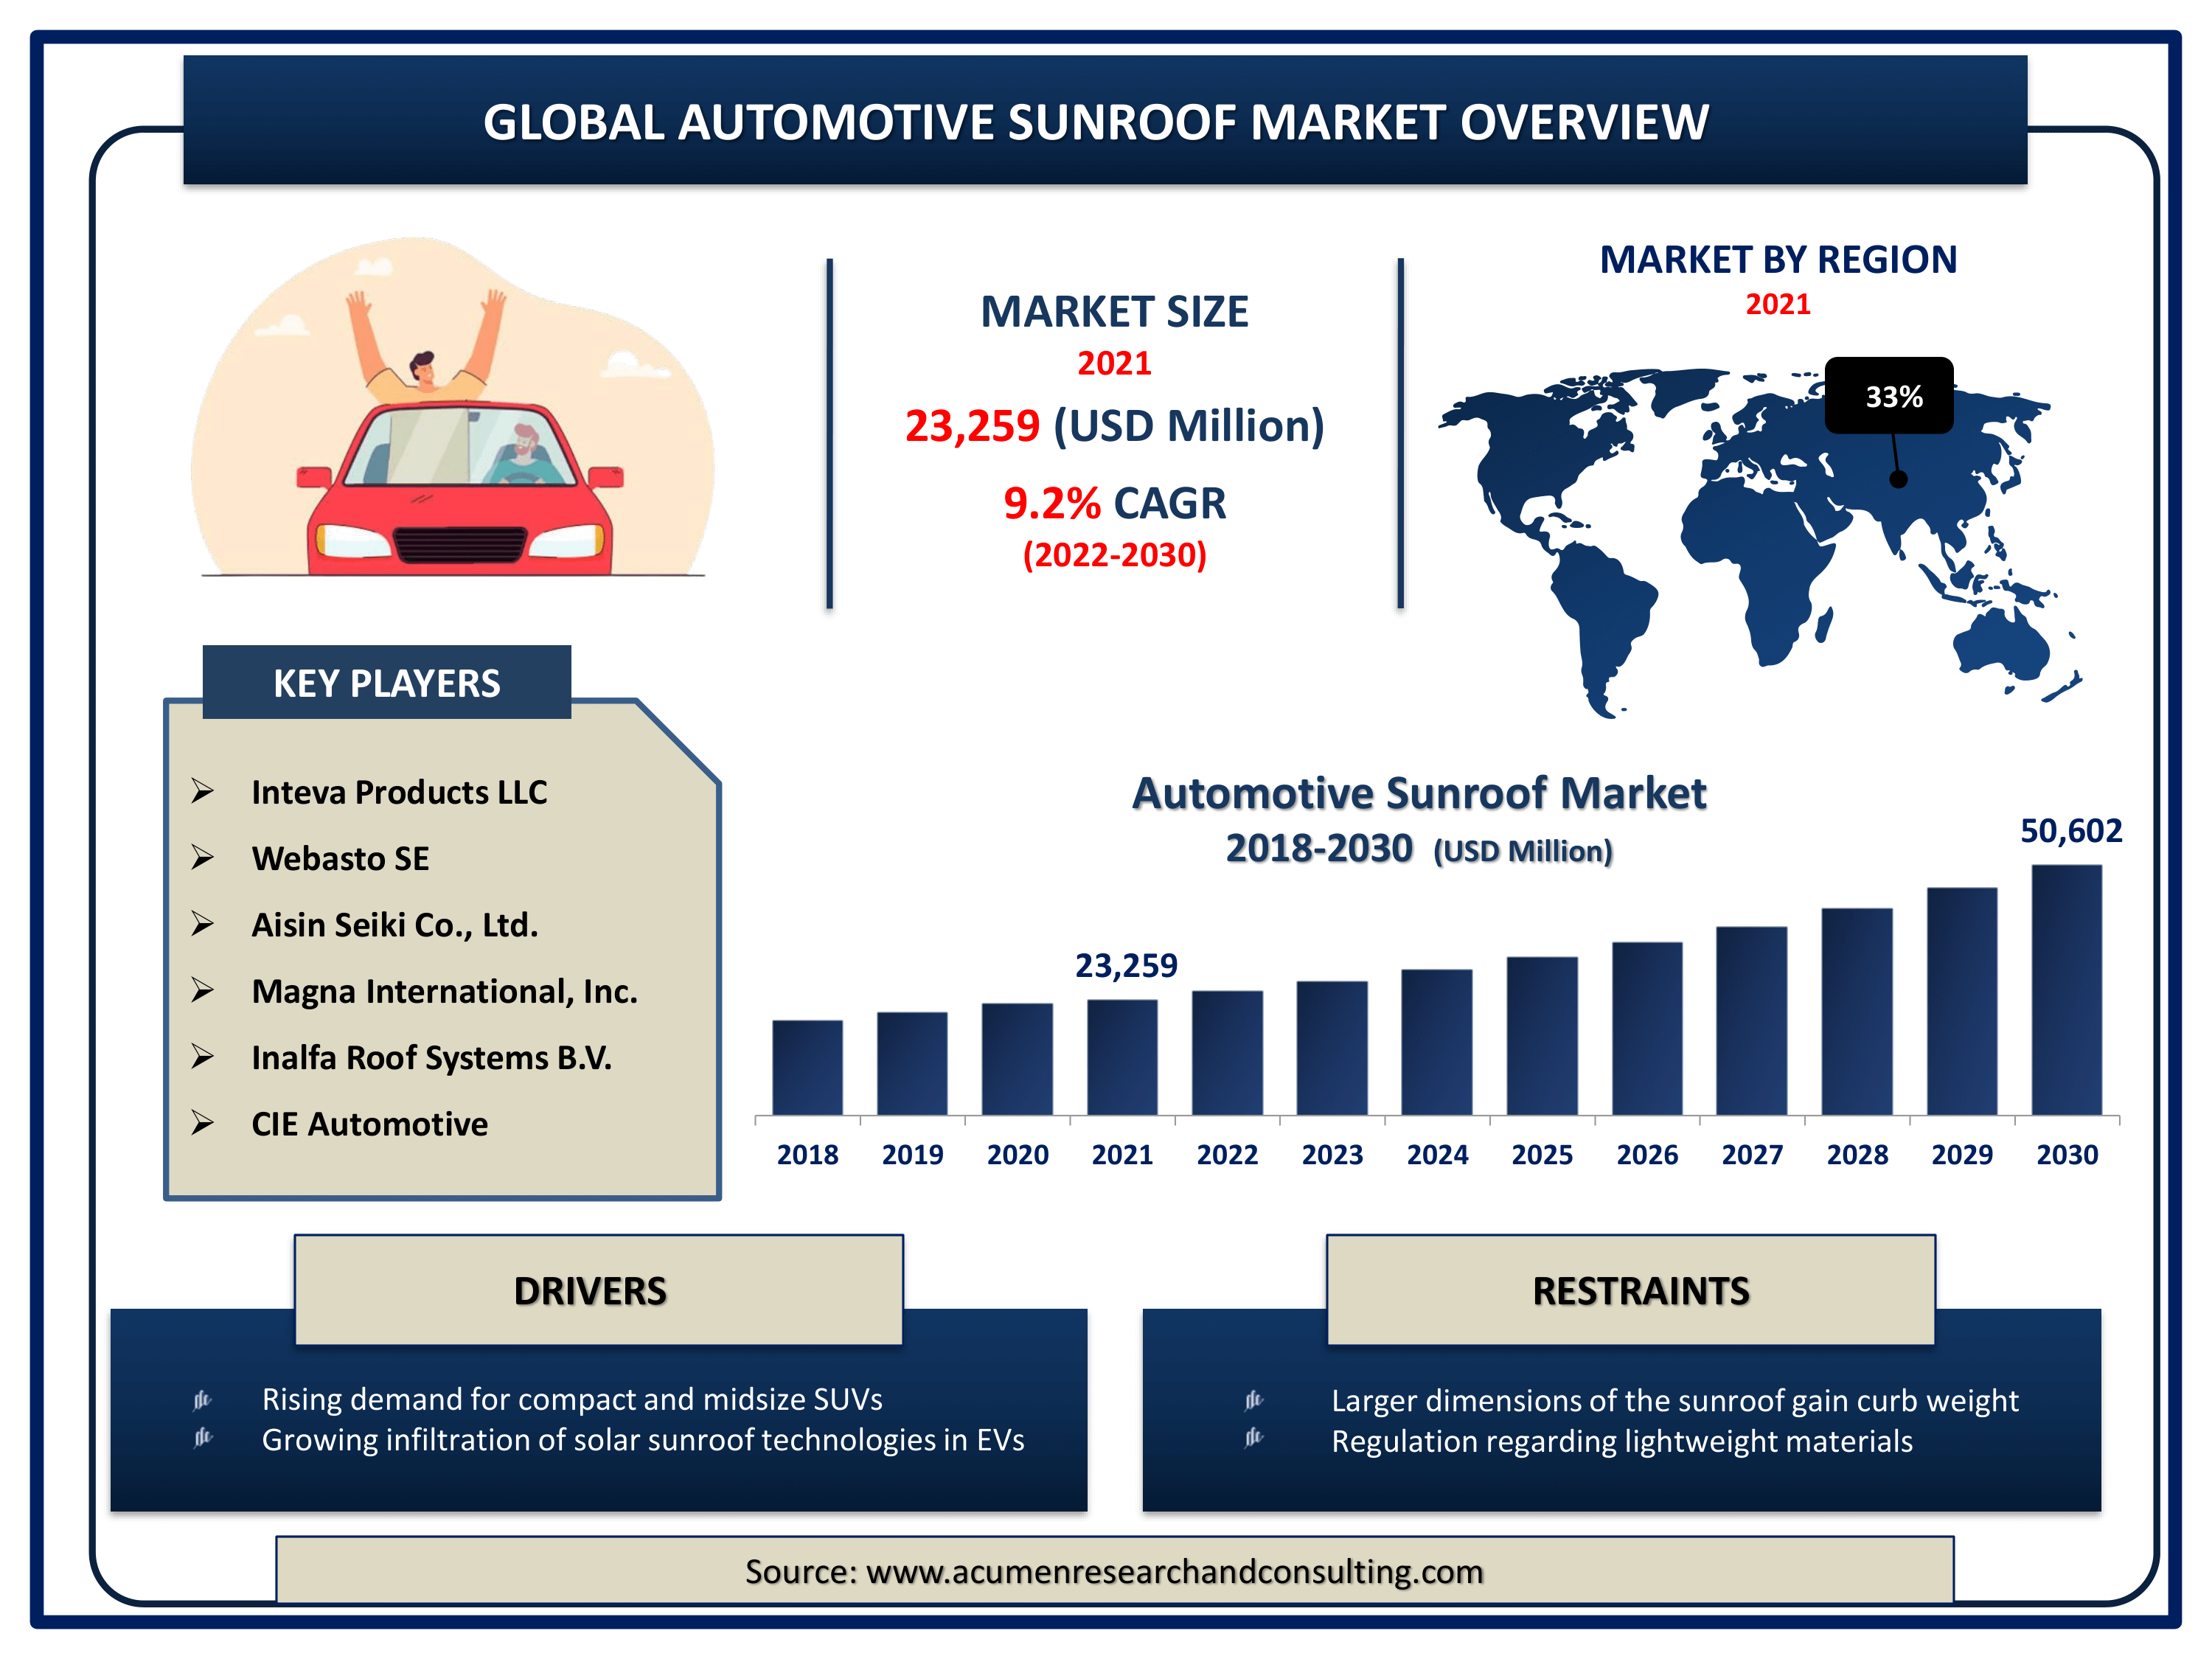 Global automotive sunroof market revenue intended to gain USD 50,602 million by 2030 with a CAGR of 9.2% from 2022 to 2030